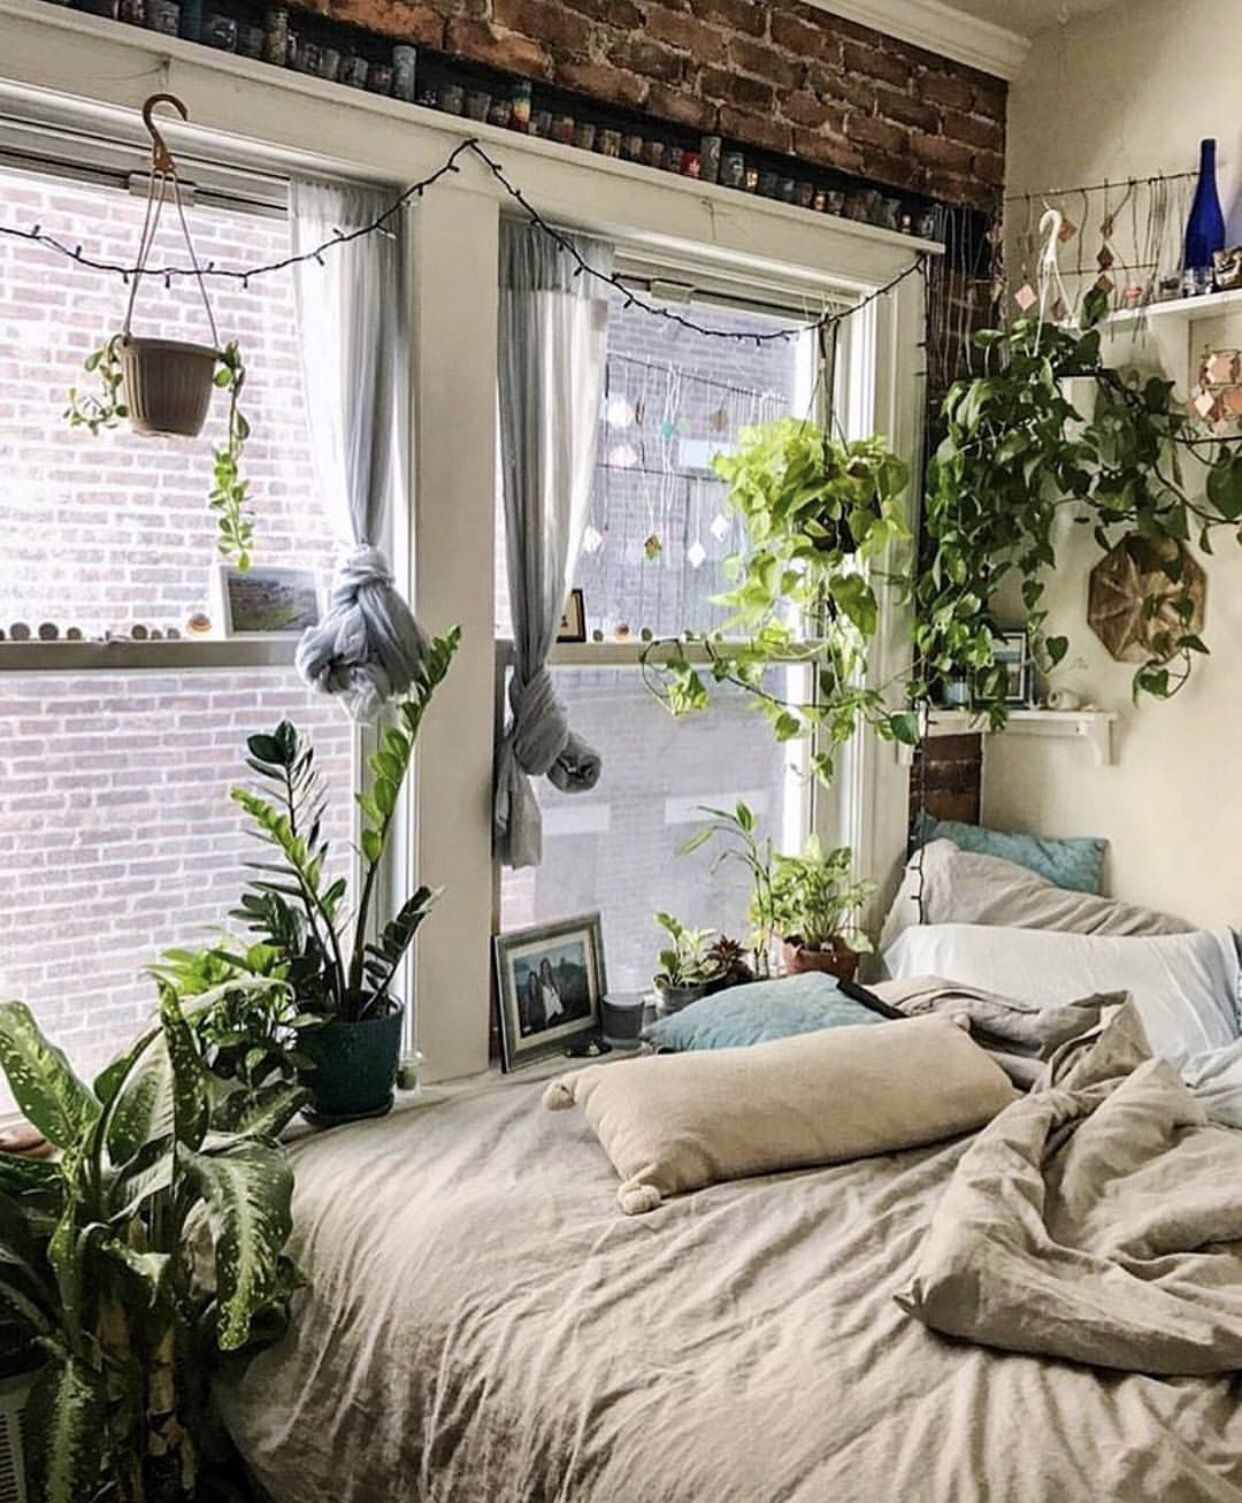 Small Plants For Bedroom
 This small light filled bedroom is perfect for plants